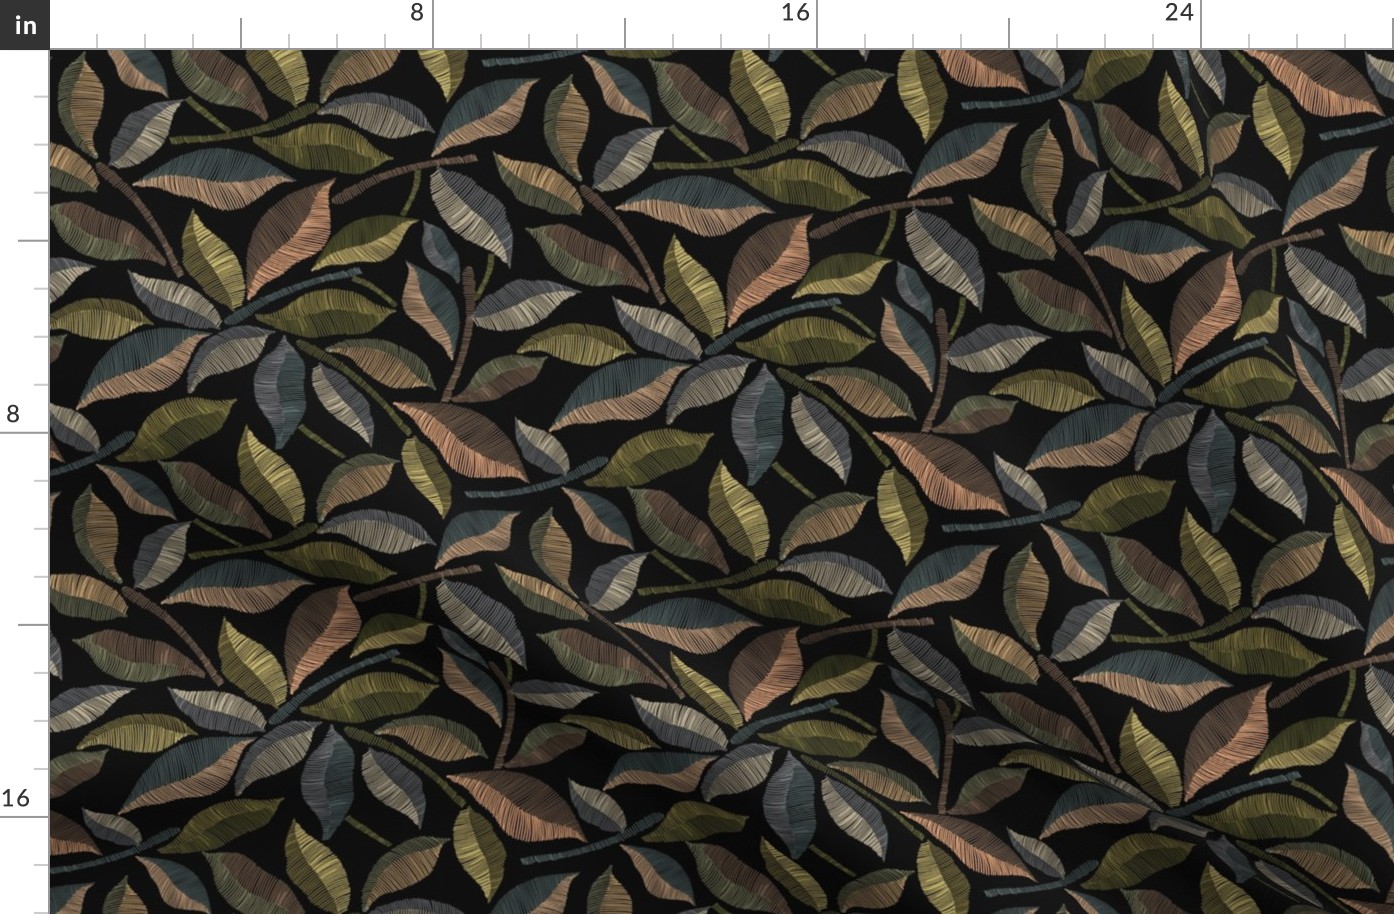 Embroidered Leafy Branches in Earthy Neutrals on Black